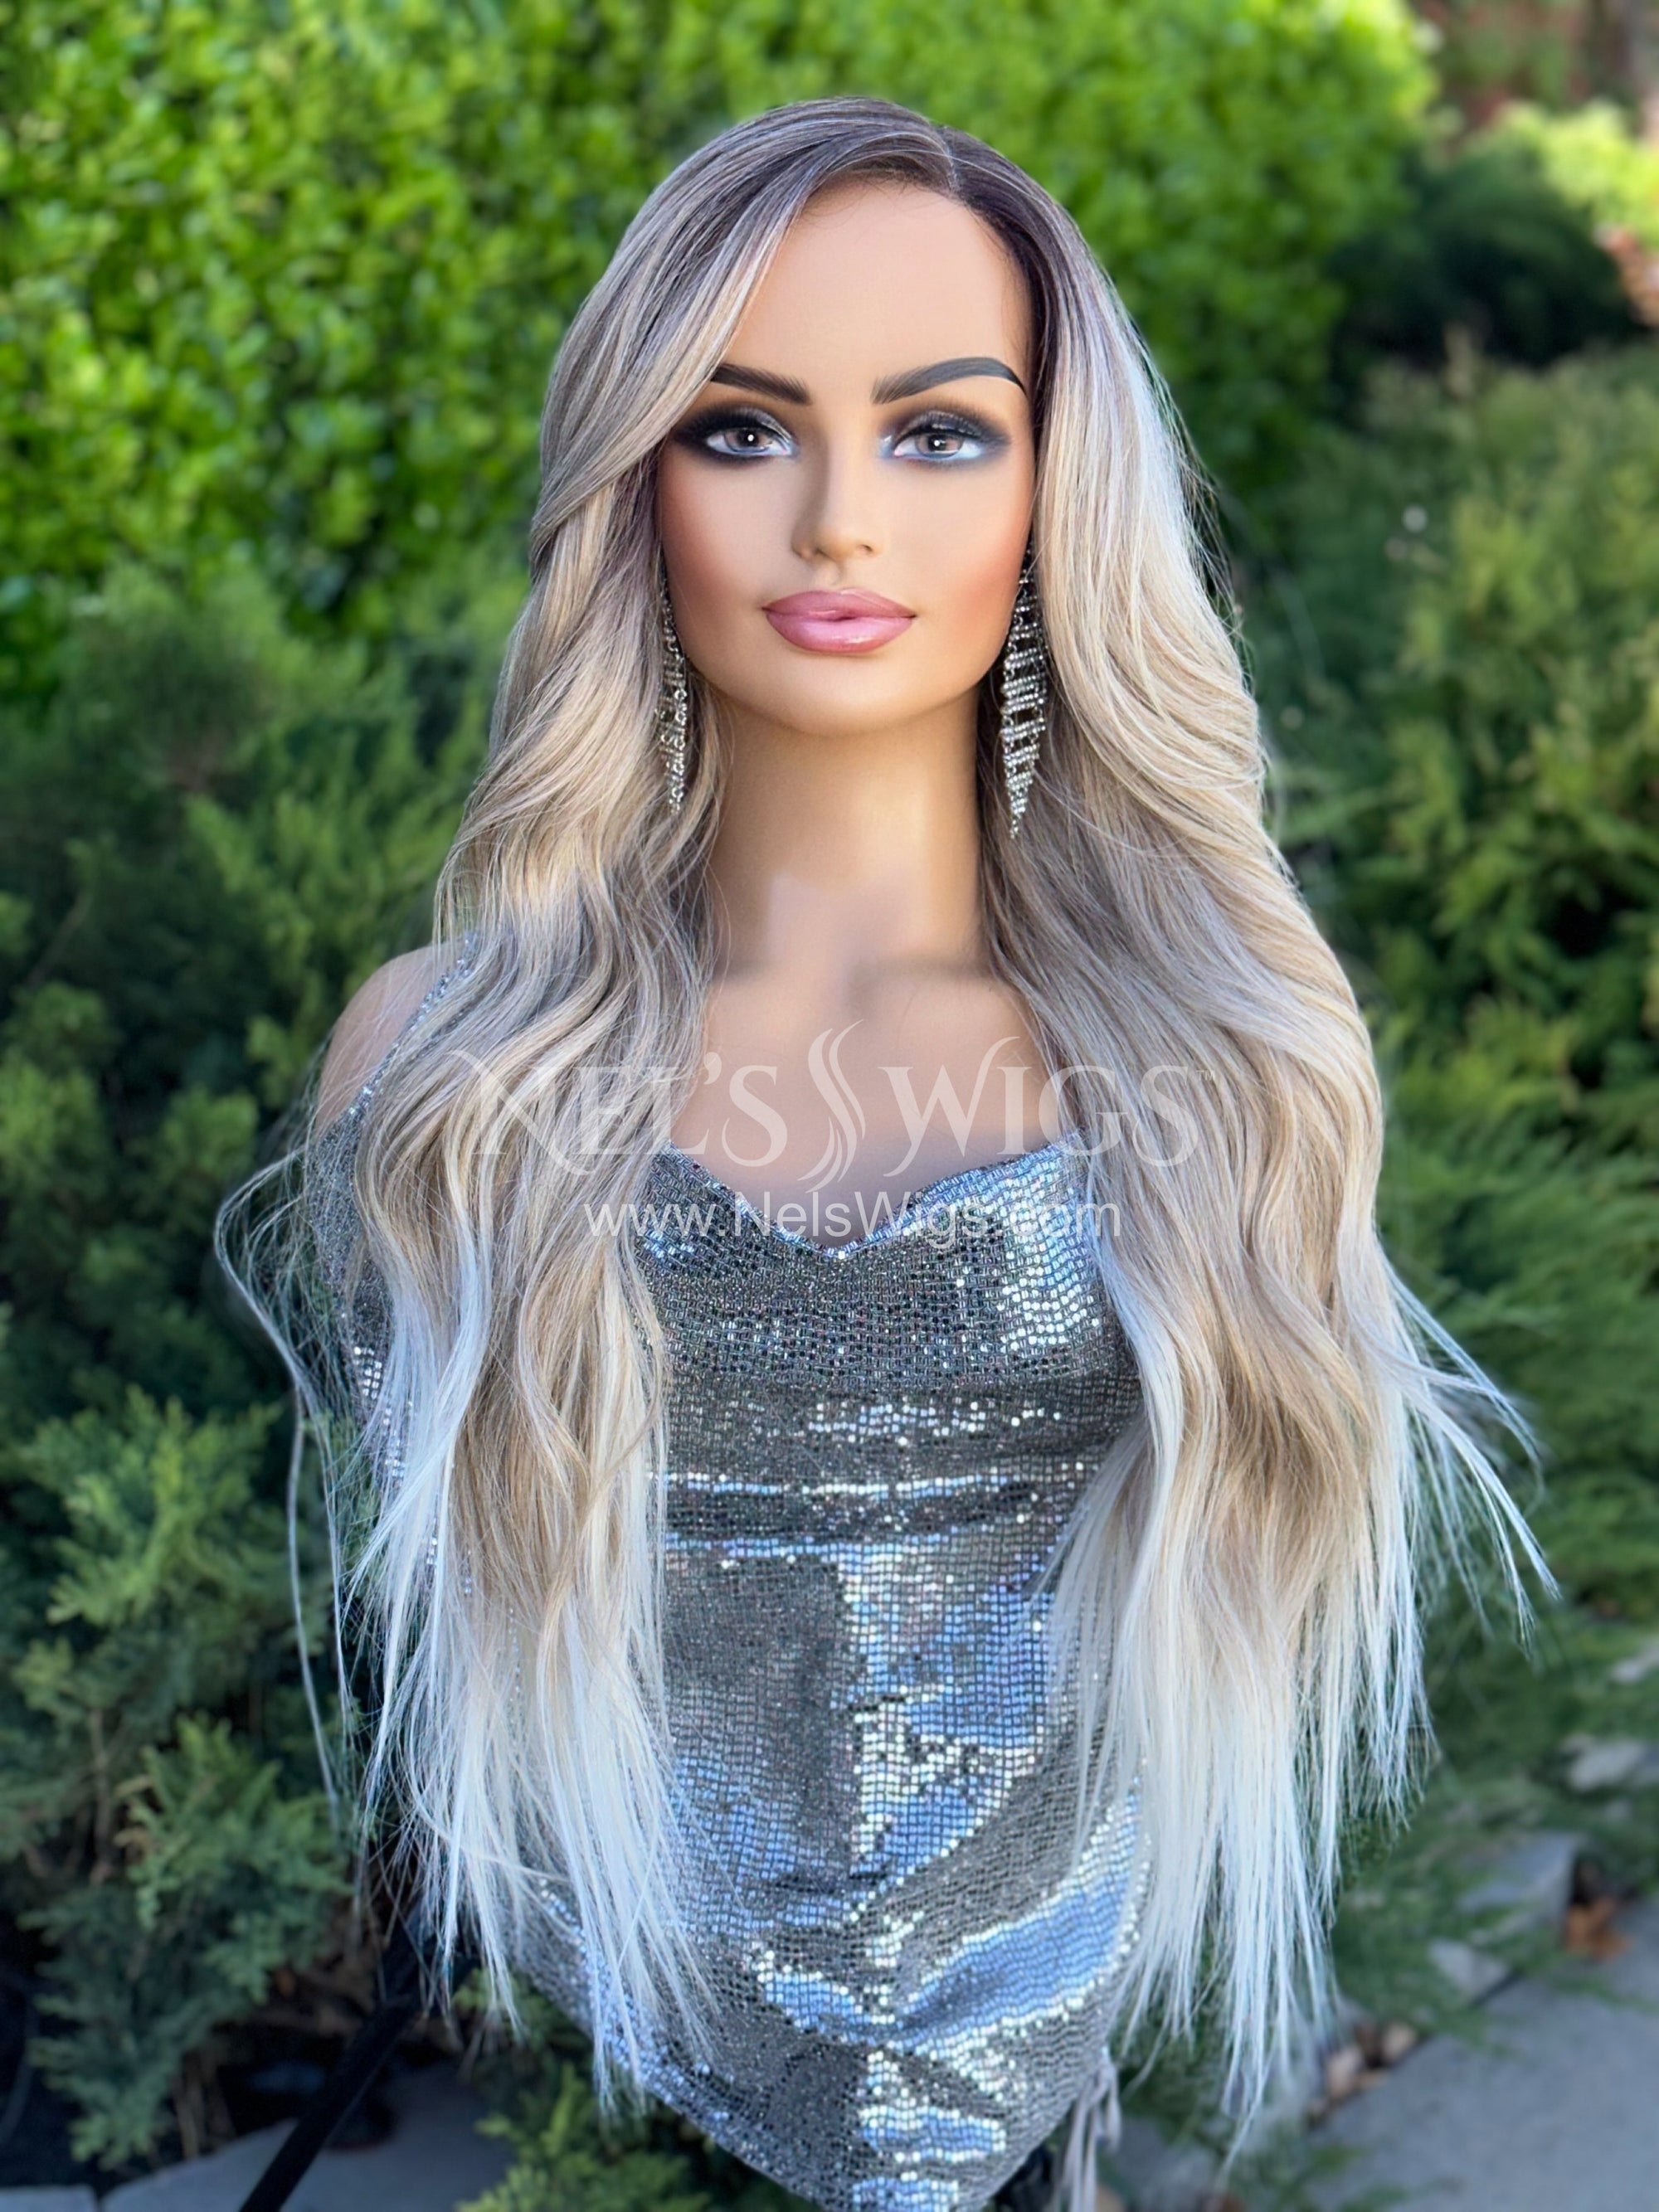 Bianca - Cream and Icy Blonde with Front Layers